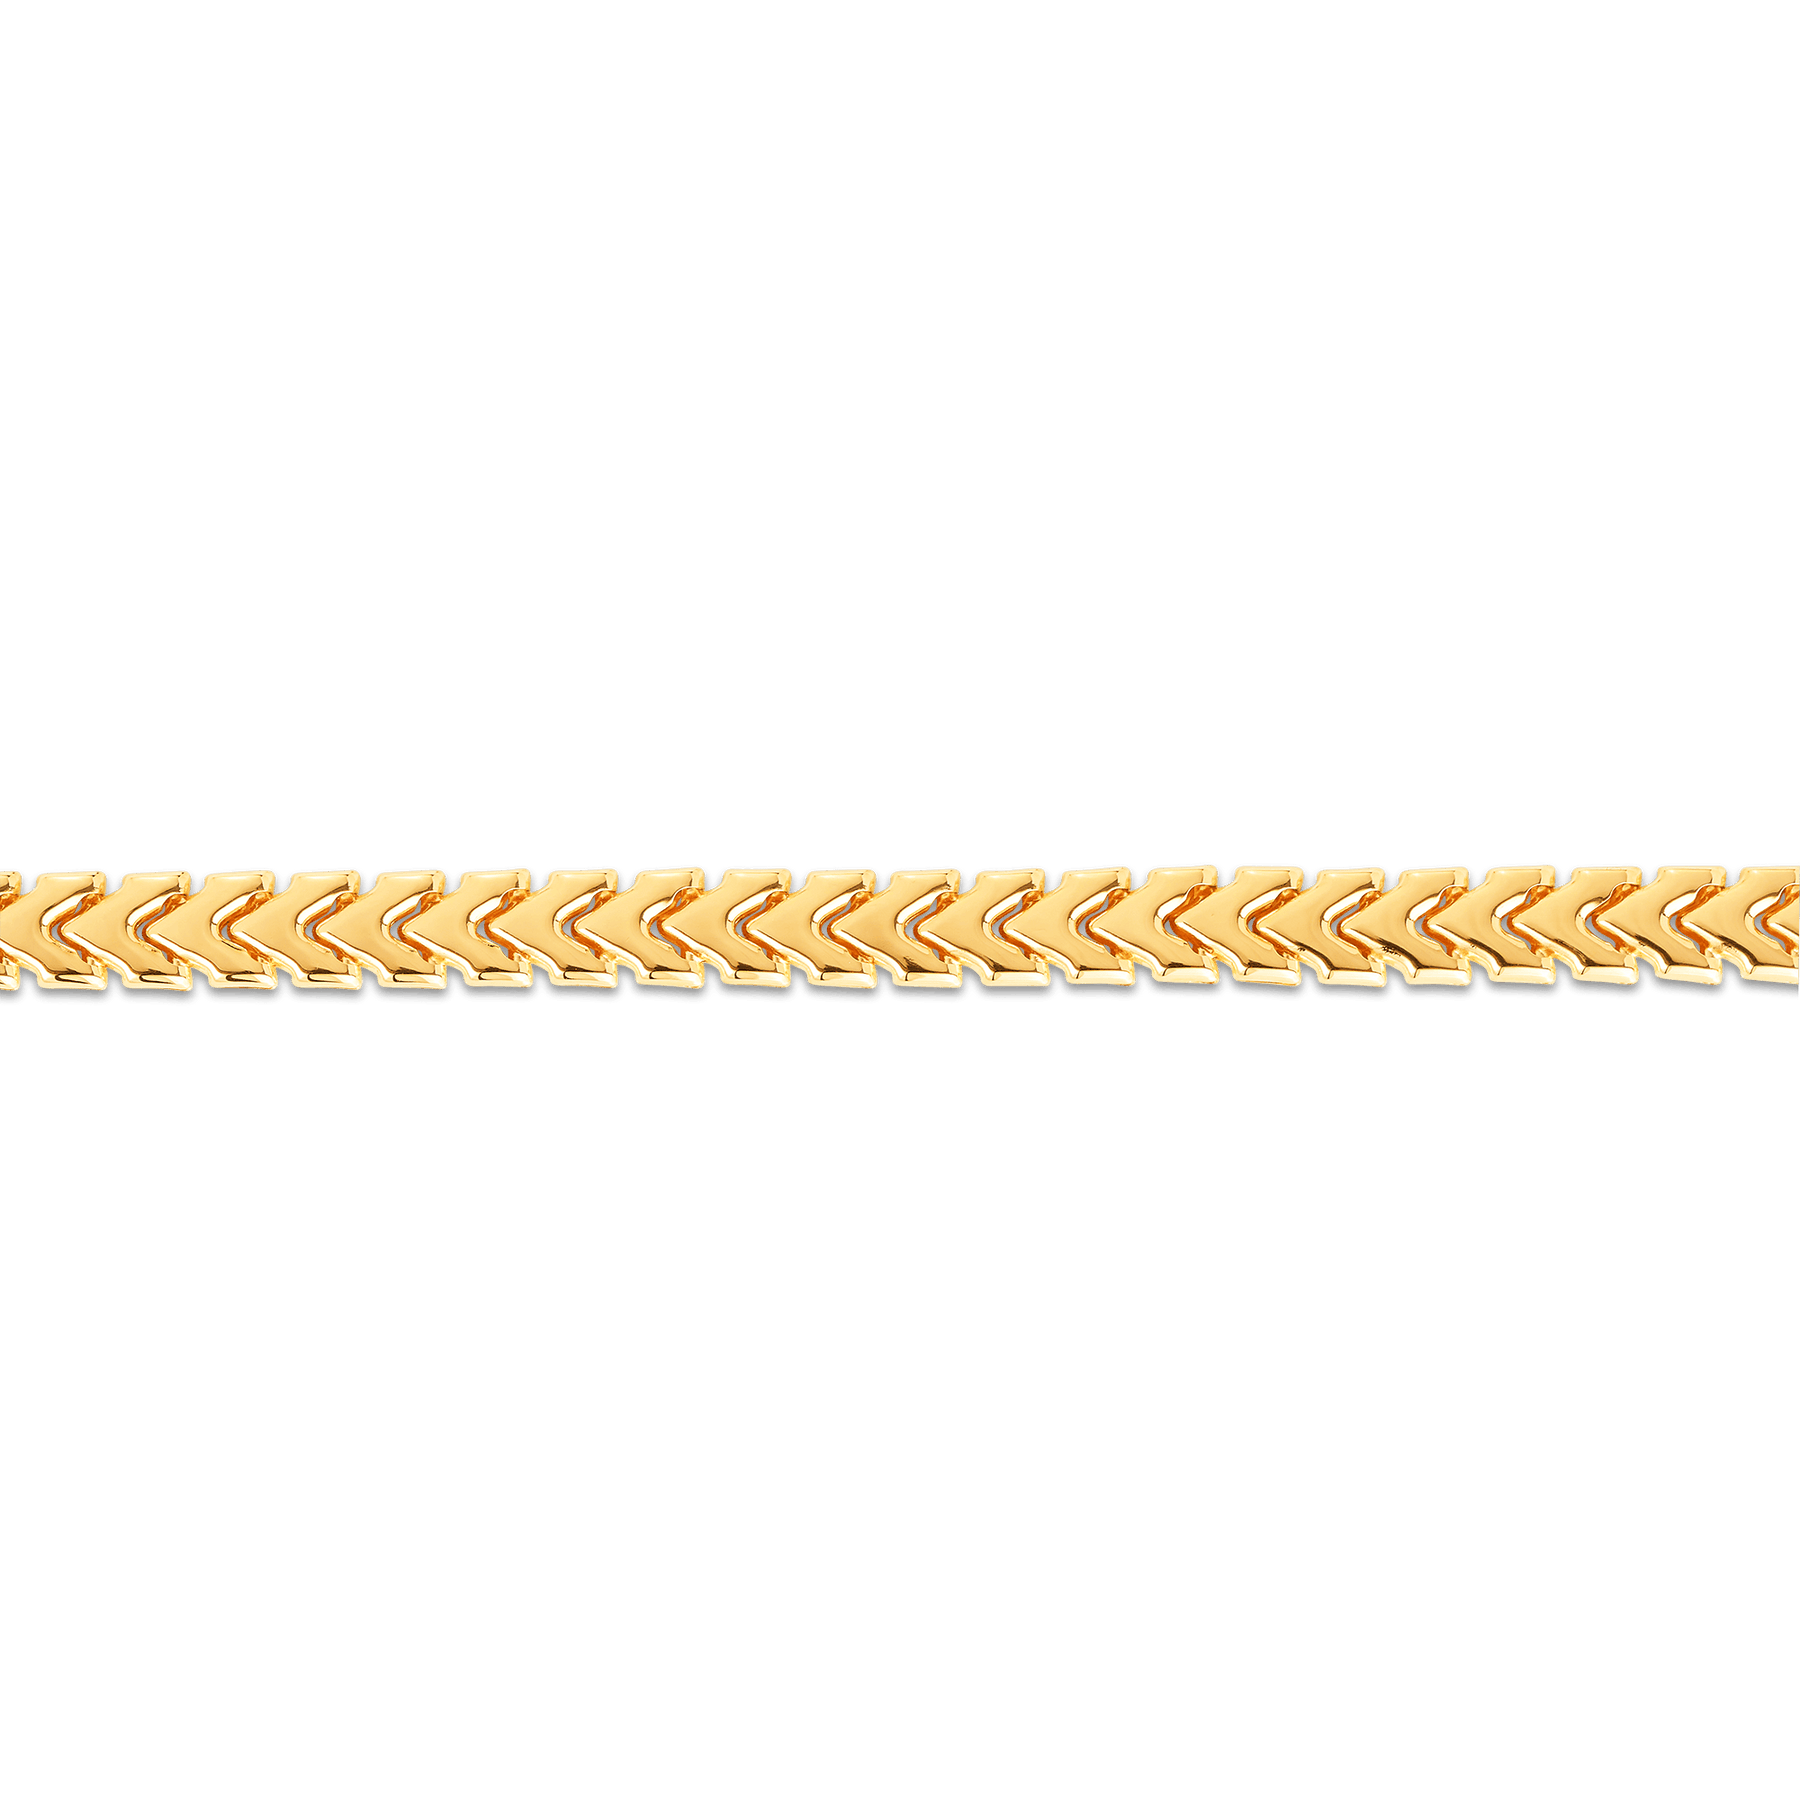 Foxtail Bracelet in 9ct Yellow Gold - Wallace Bishop